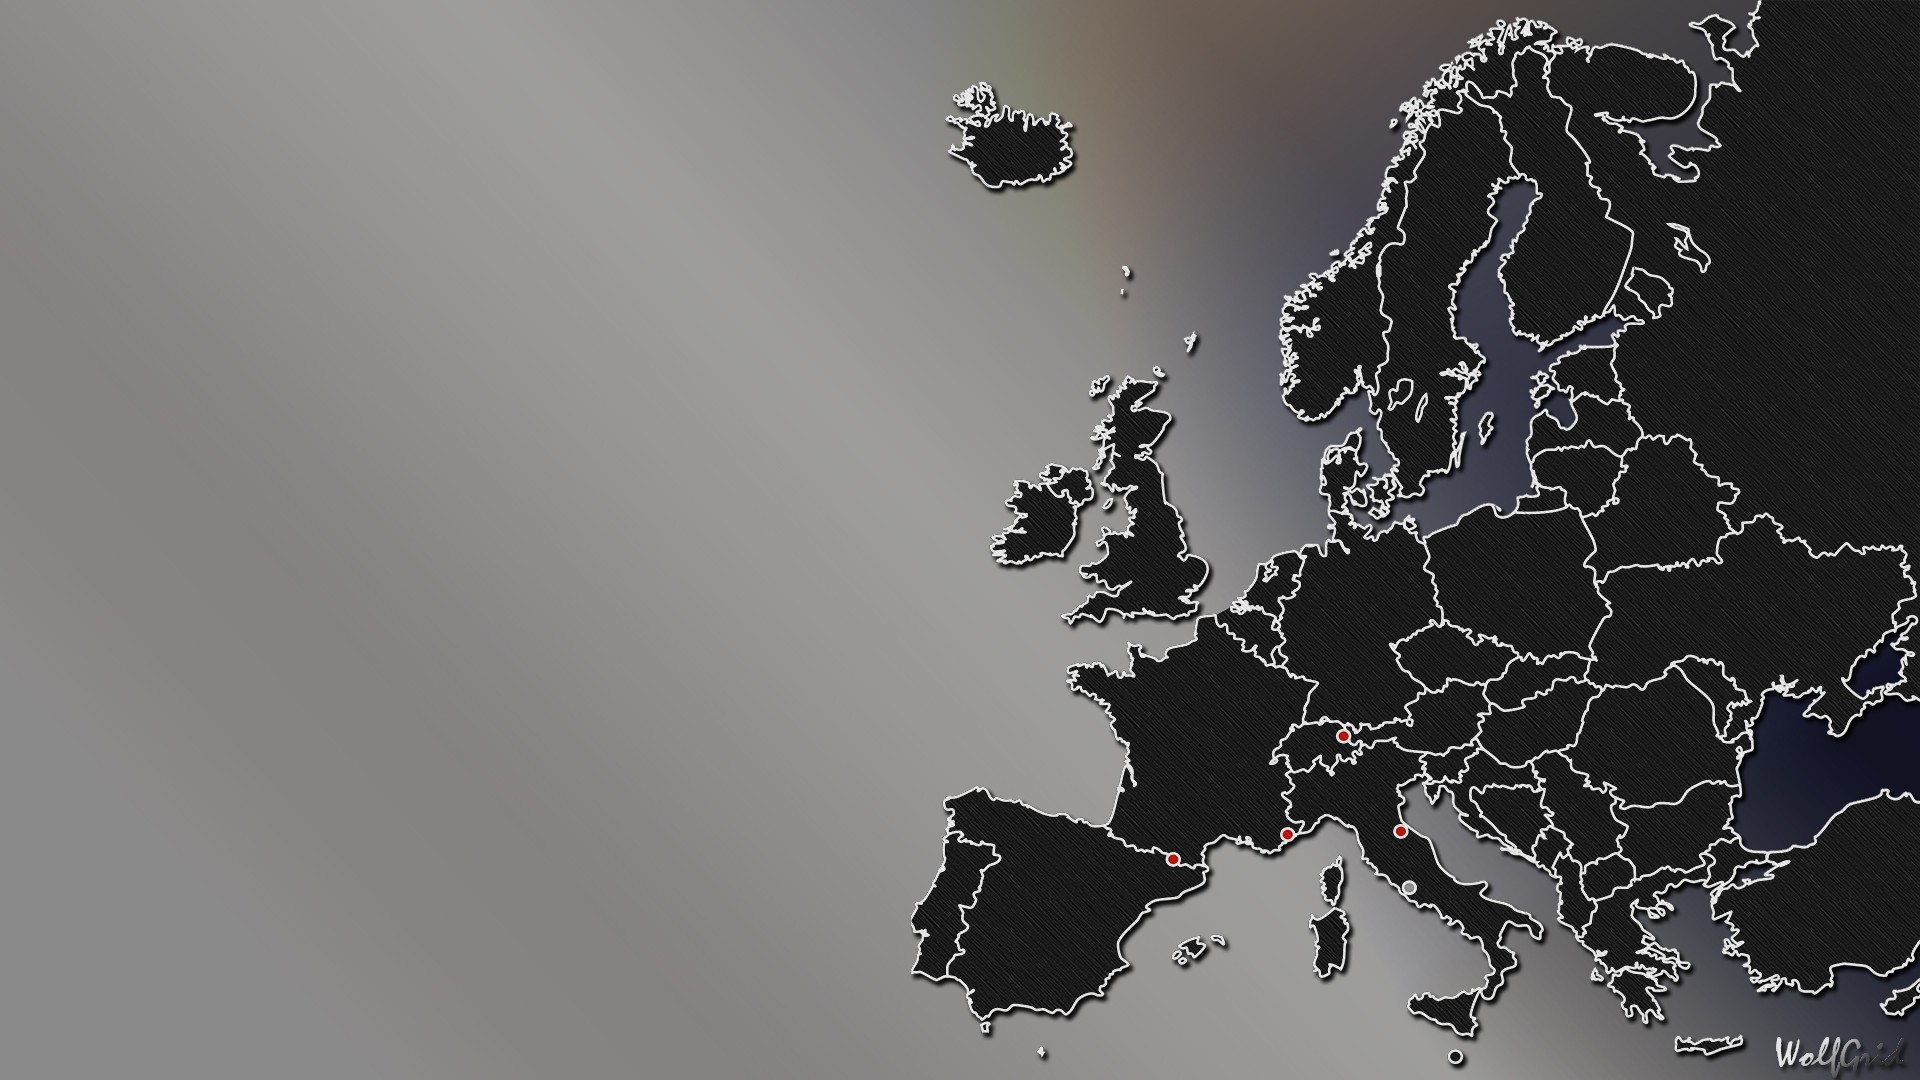 General 1920x1080 map Europe countries